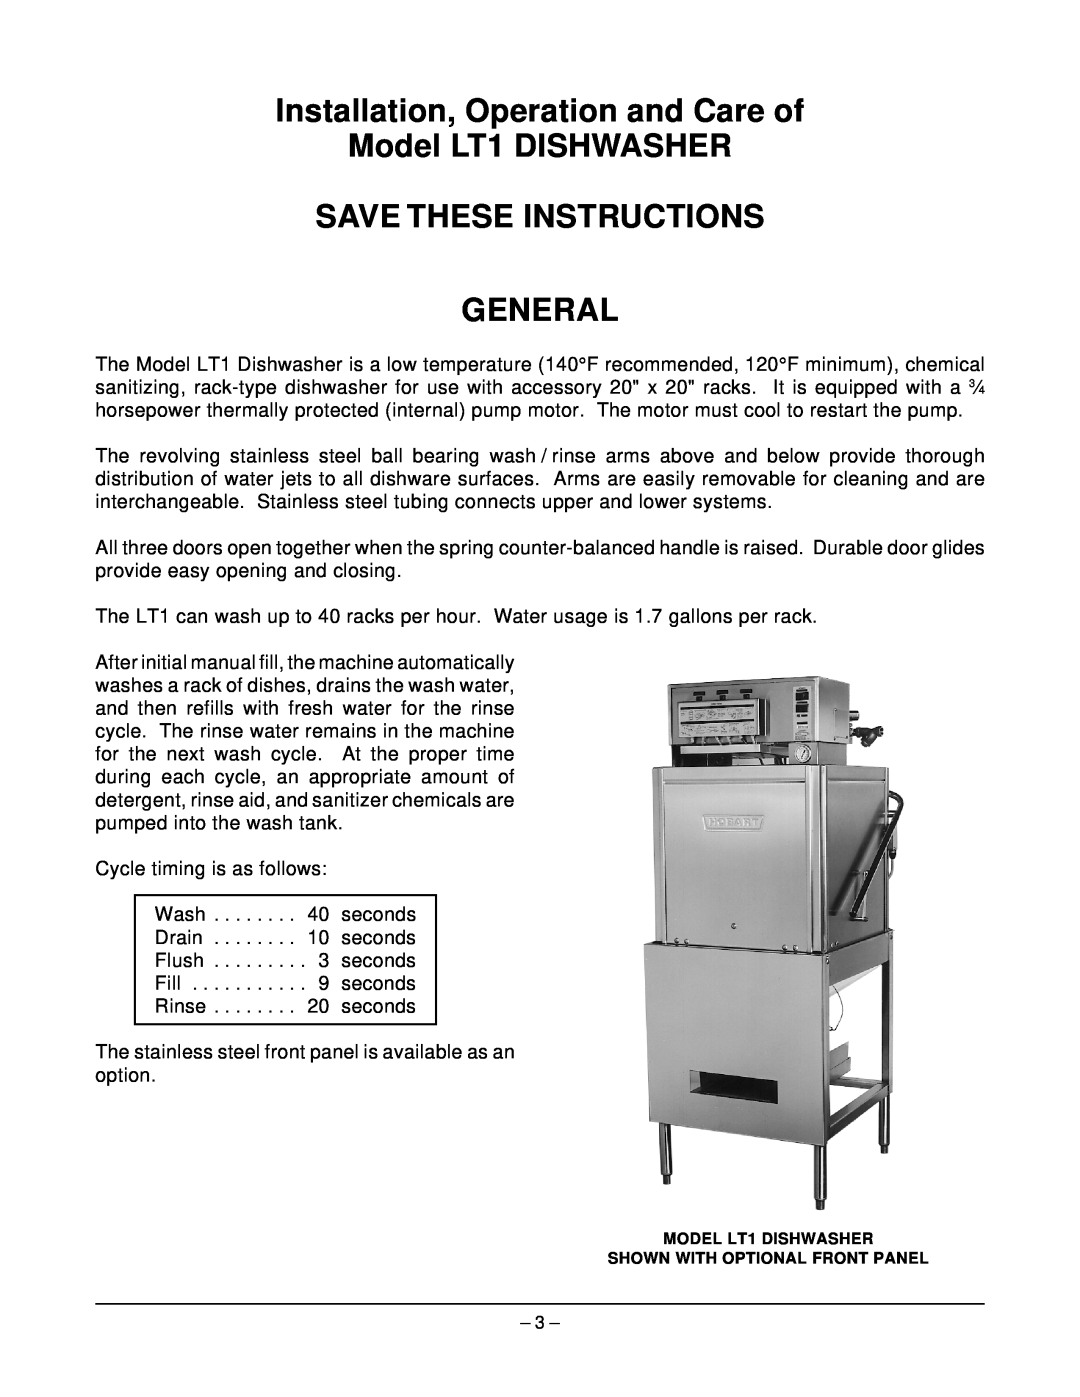 Hobart LT1 ML-104239 manual Installation, Operation and Care of, Model LT1 DISHWASHER SAVE THESE INSTRUCTIONS, General 